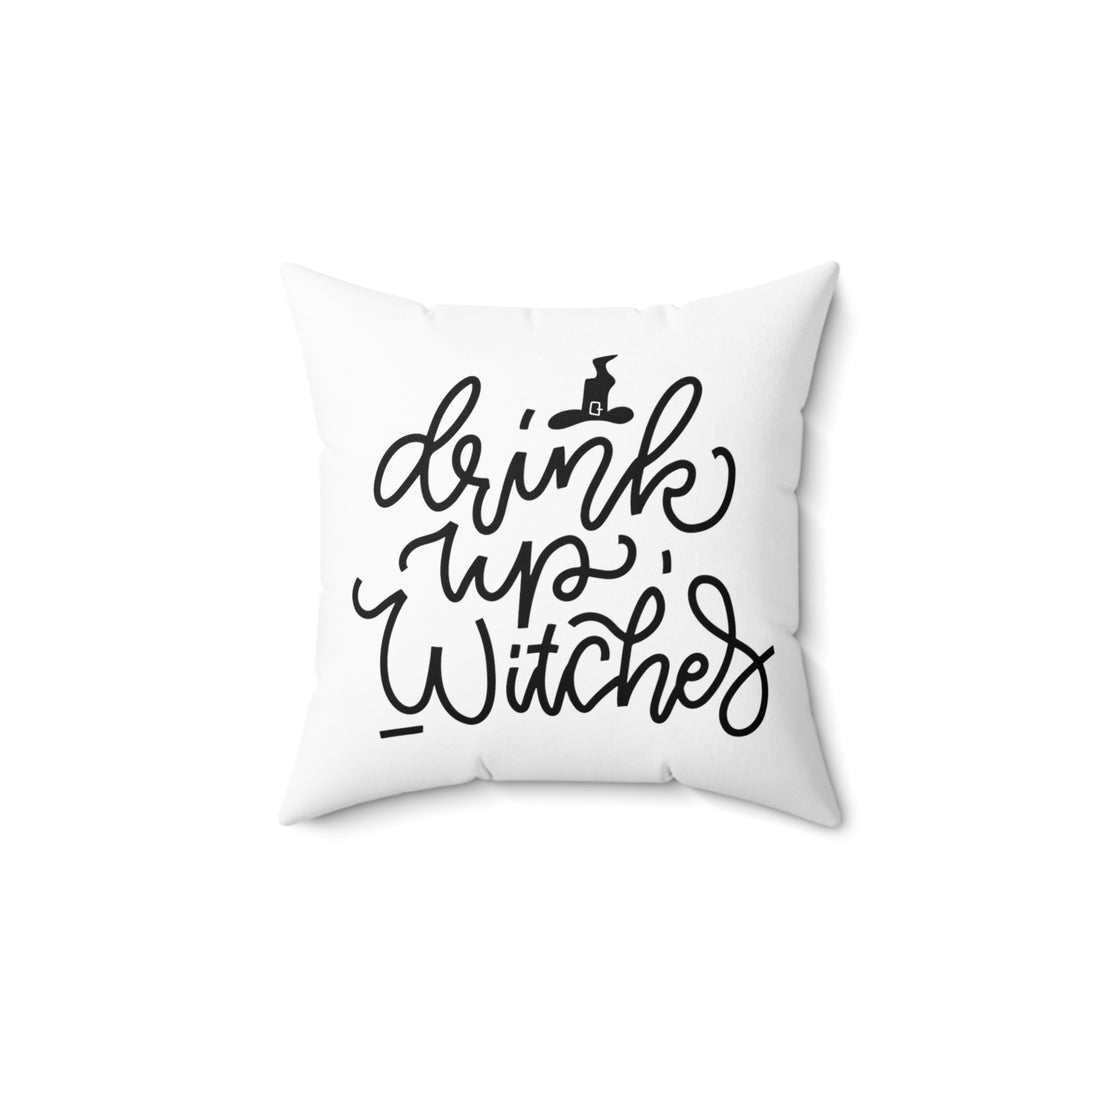 Drink up witches! Halloween Spun Polyester Square Pillow